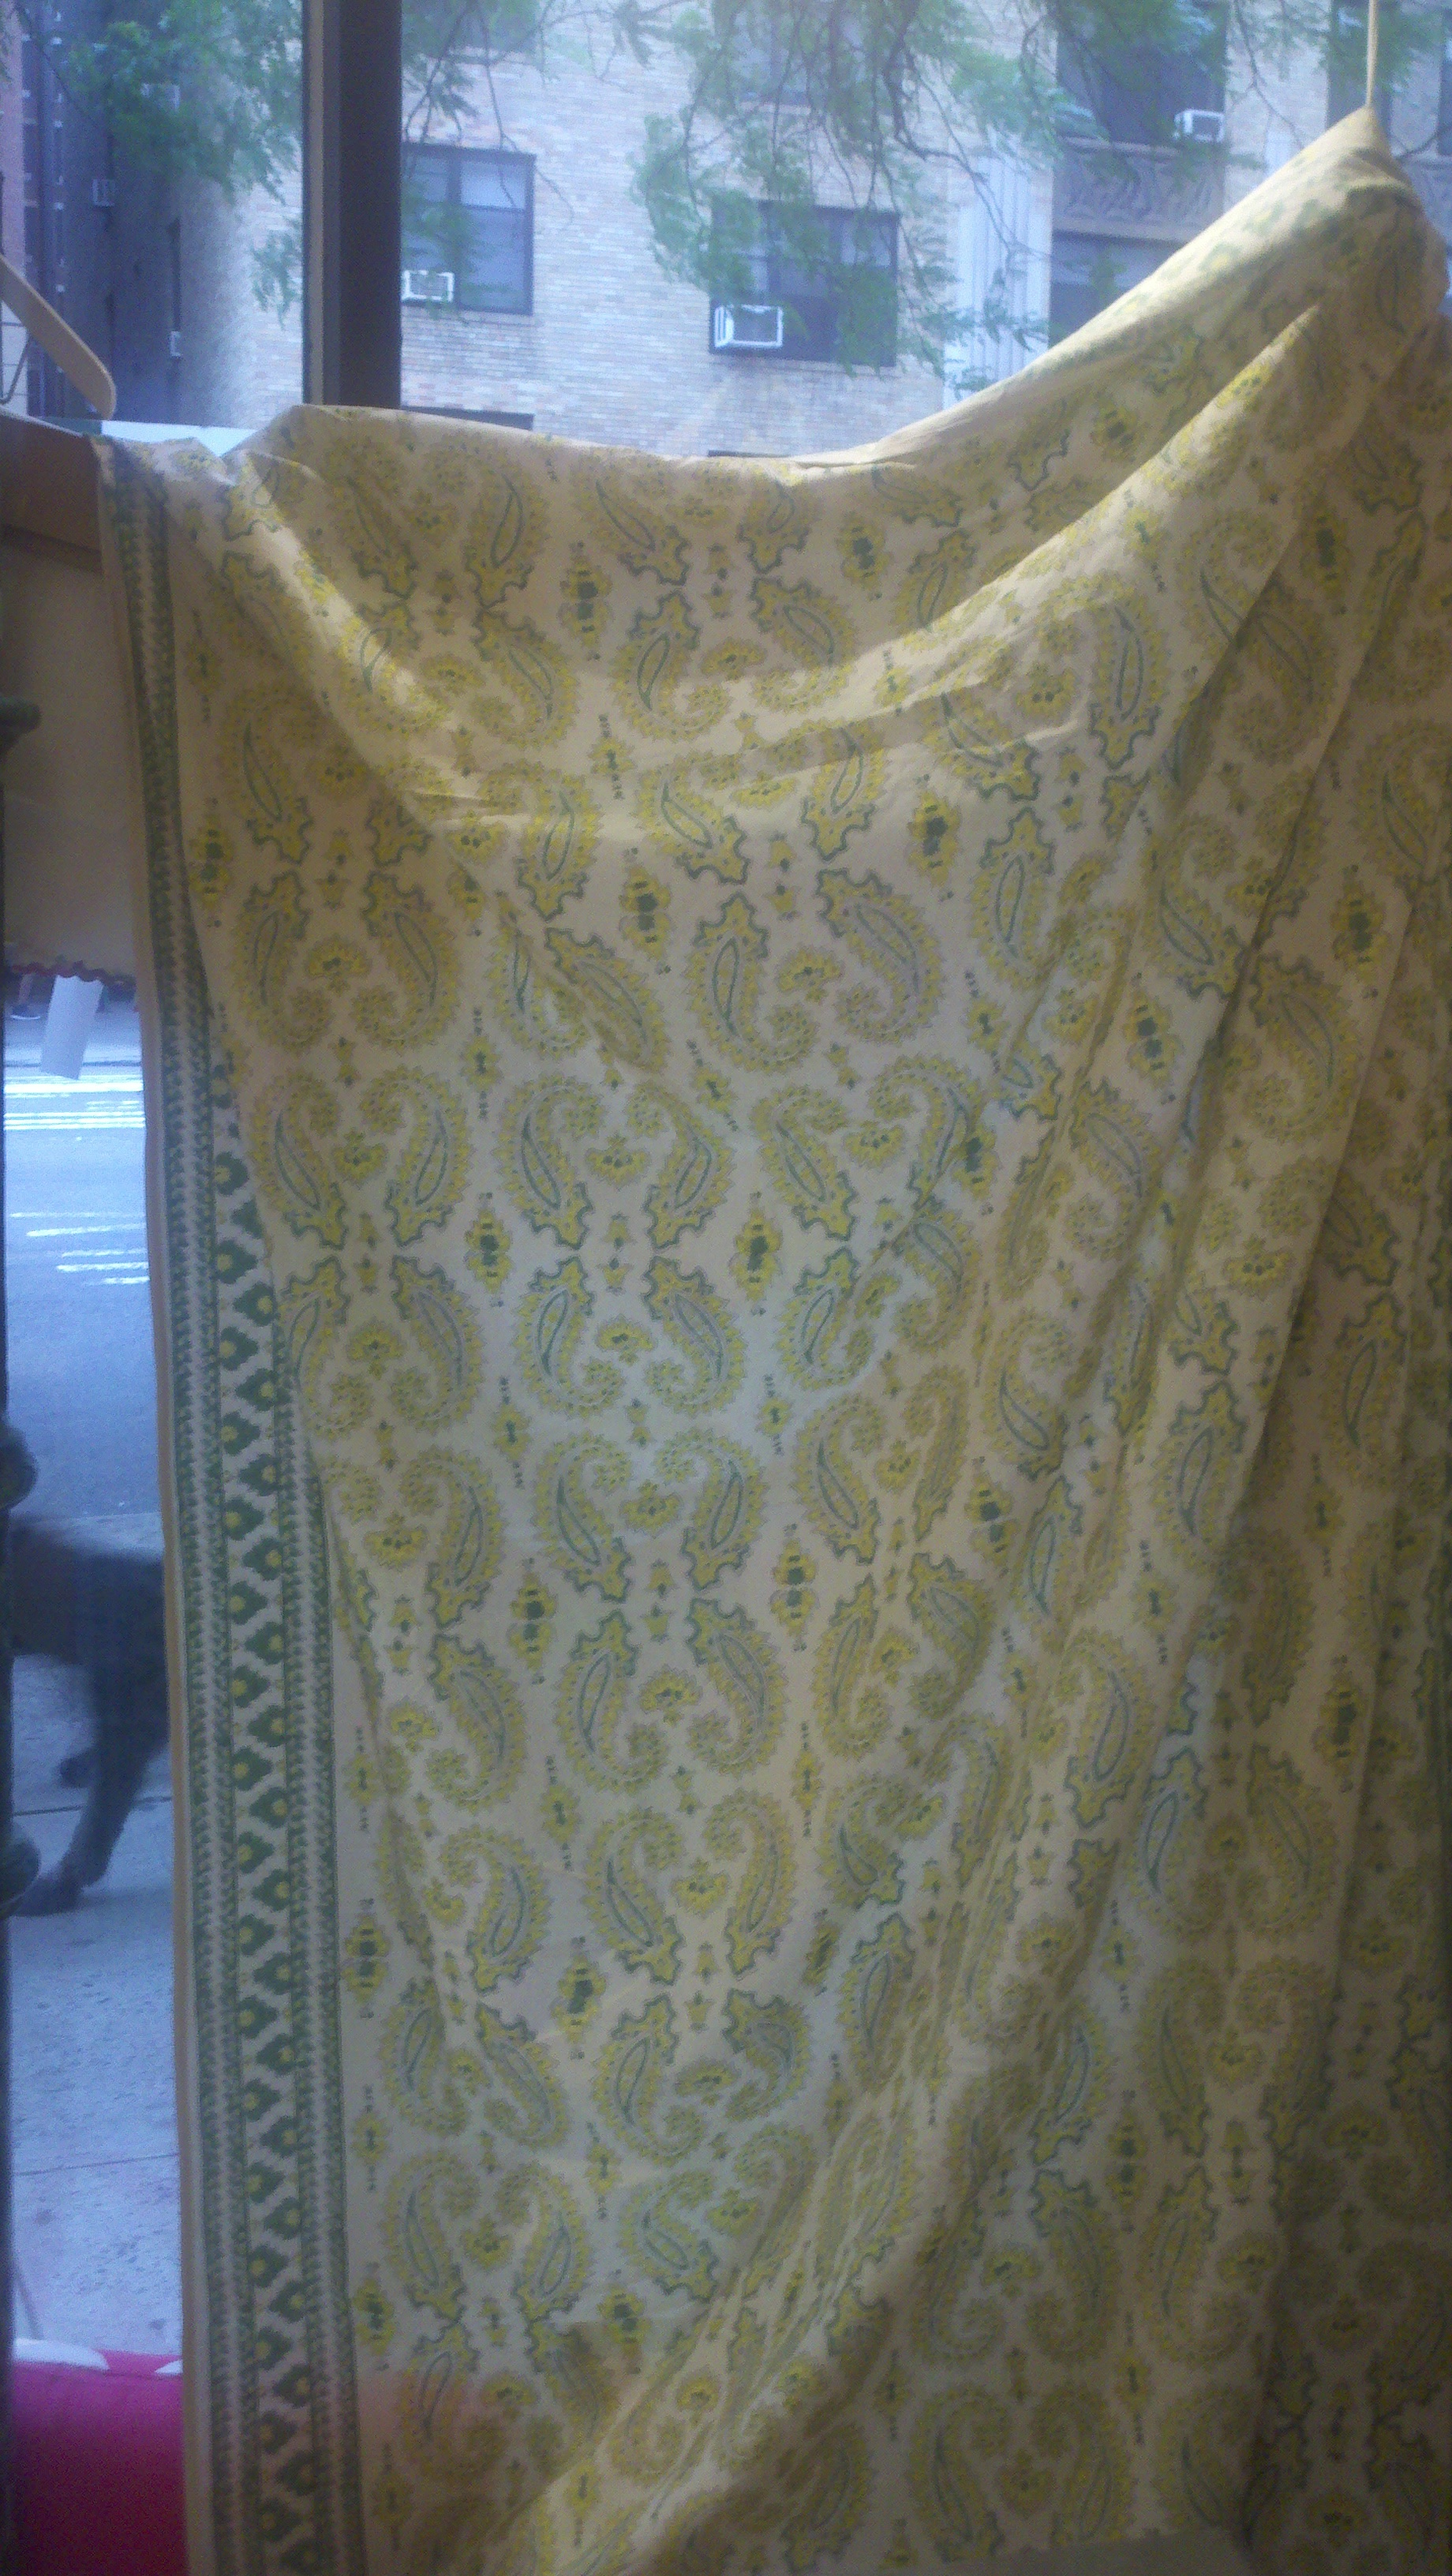 Paisley Patterned Window Panel, Bedding Store in New York, NY